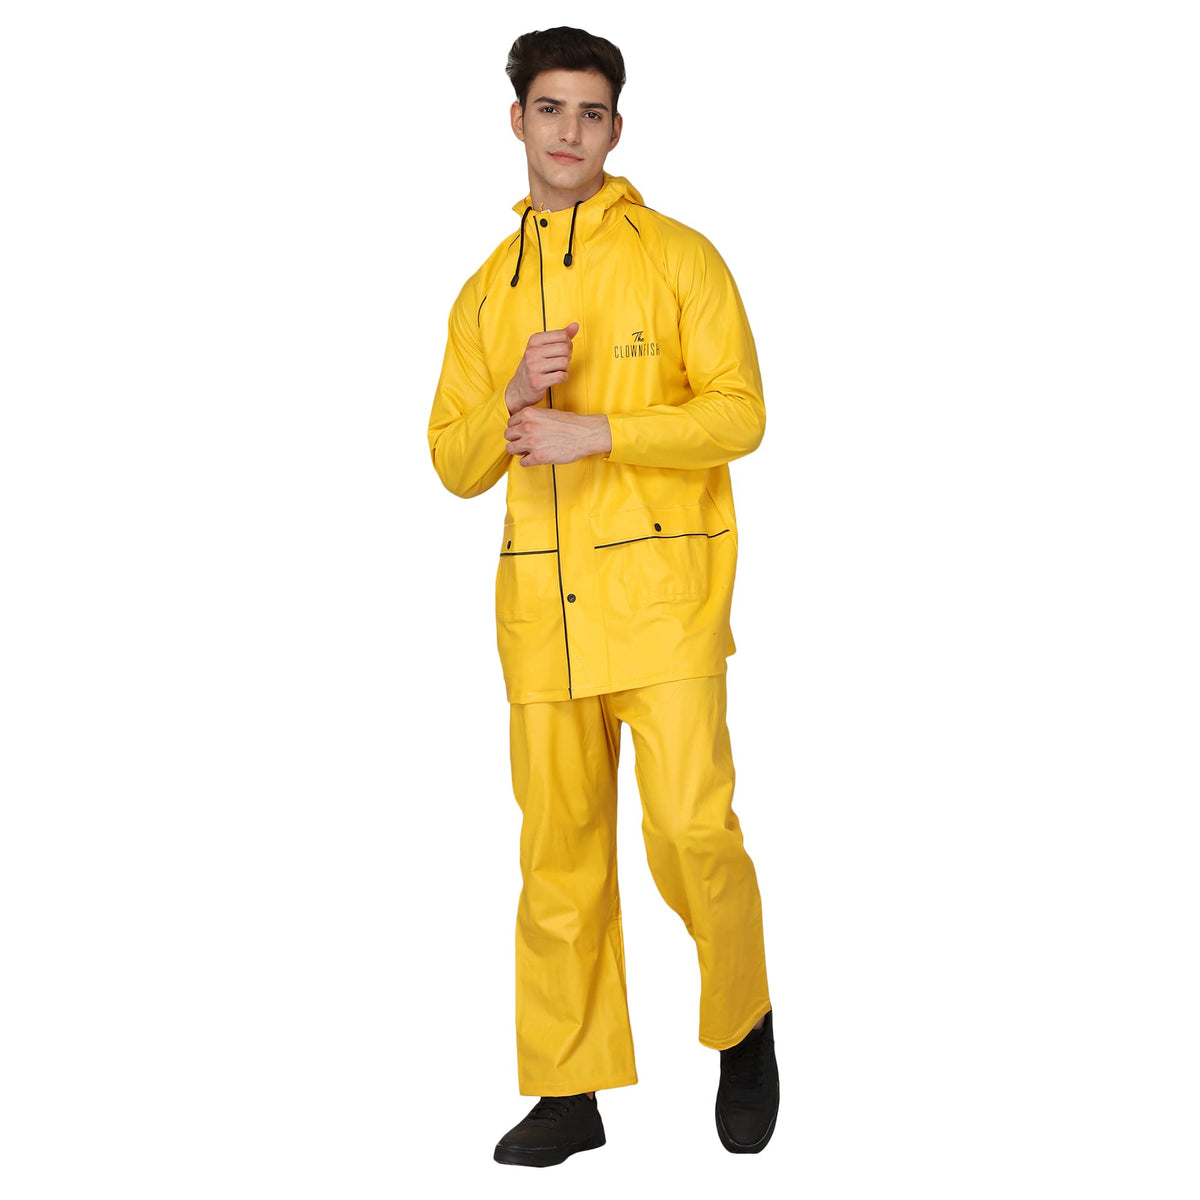 THE CLOWNFISH Oceanic Men's Waterproof PVC Raincoat with Hood and Reflector Logo at Back for Night Travelling. Set of Top and Bottom (Black, XL)